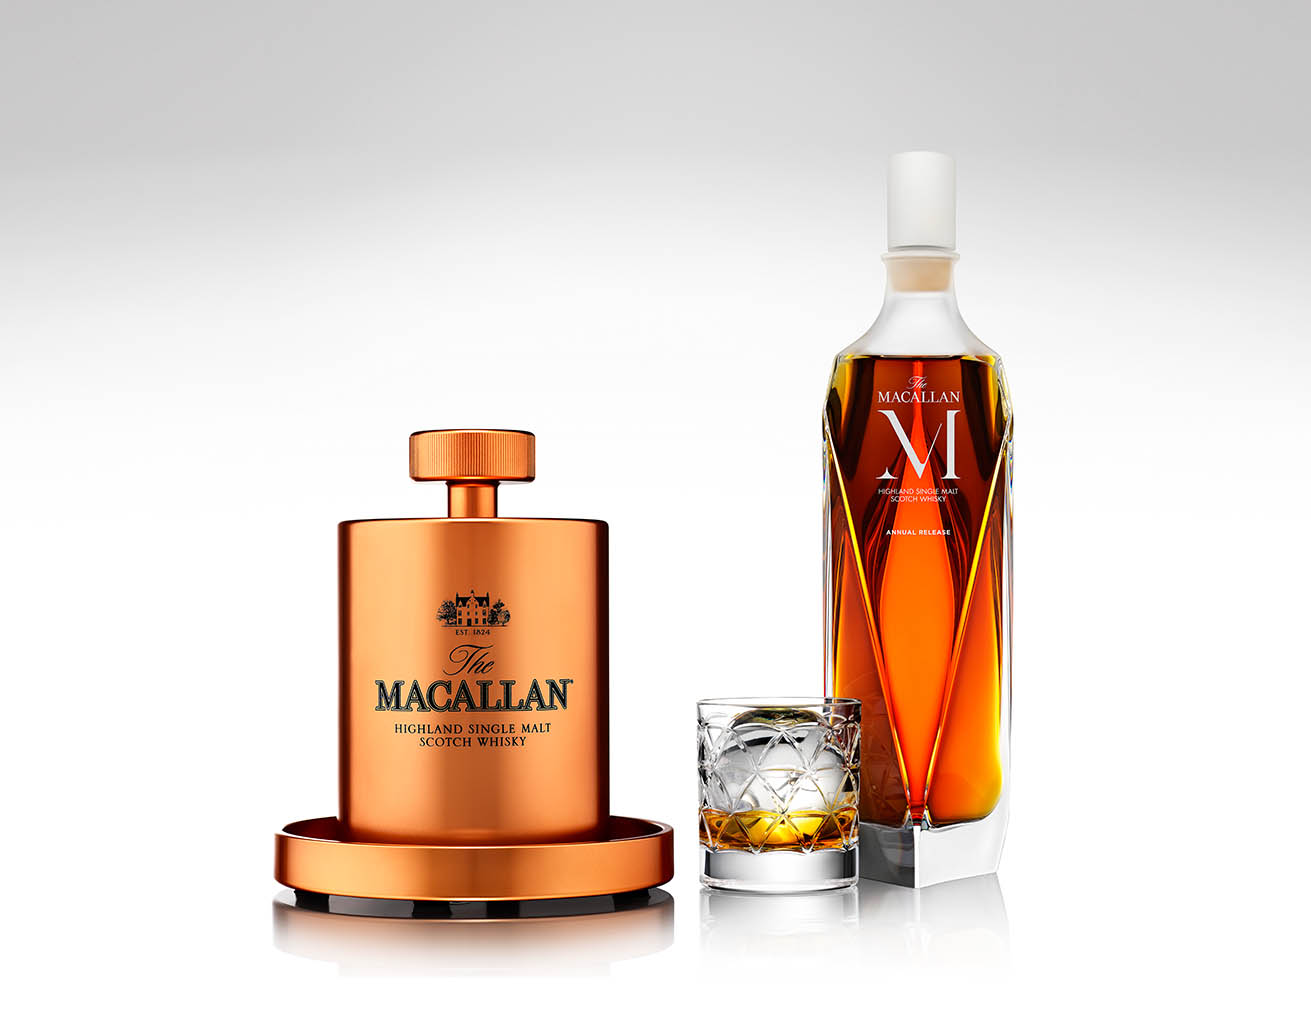 Drinks Photography of Macallan whisky bottle and serve by Packshot Factory